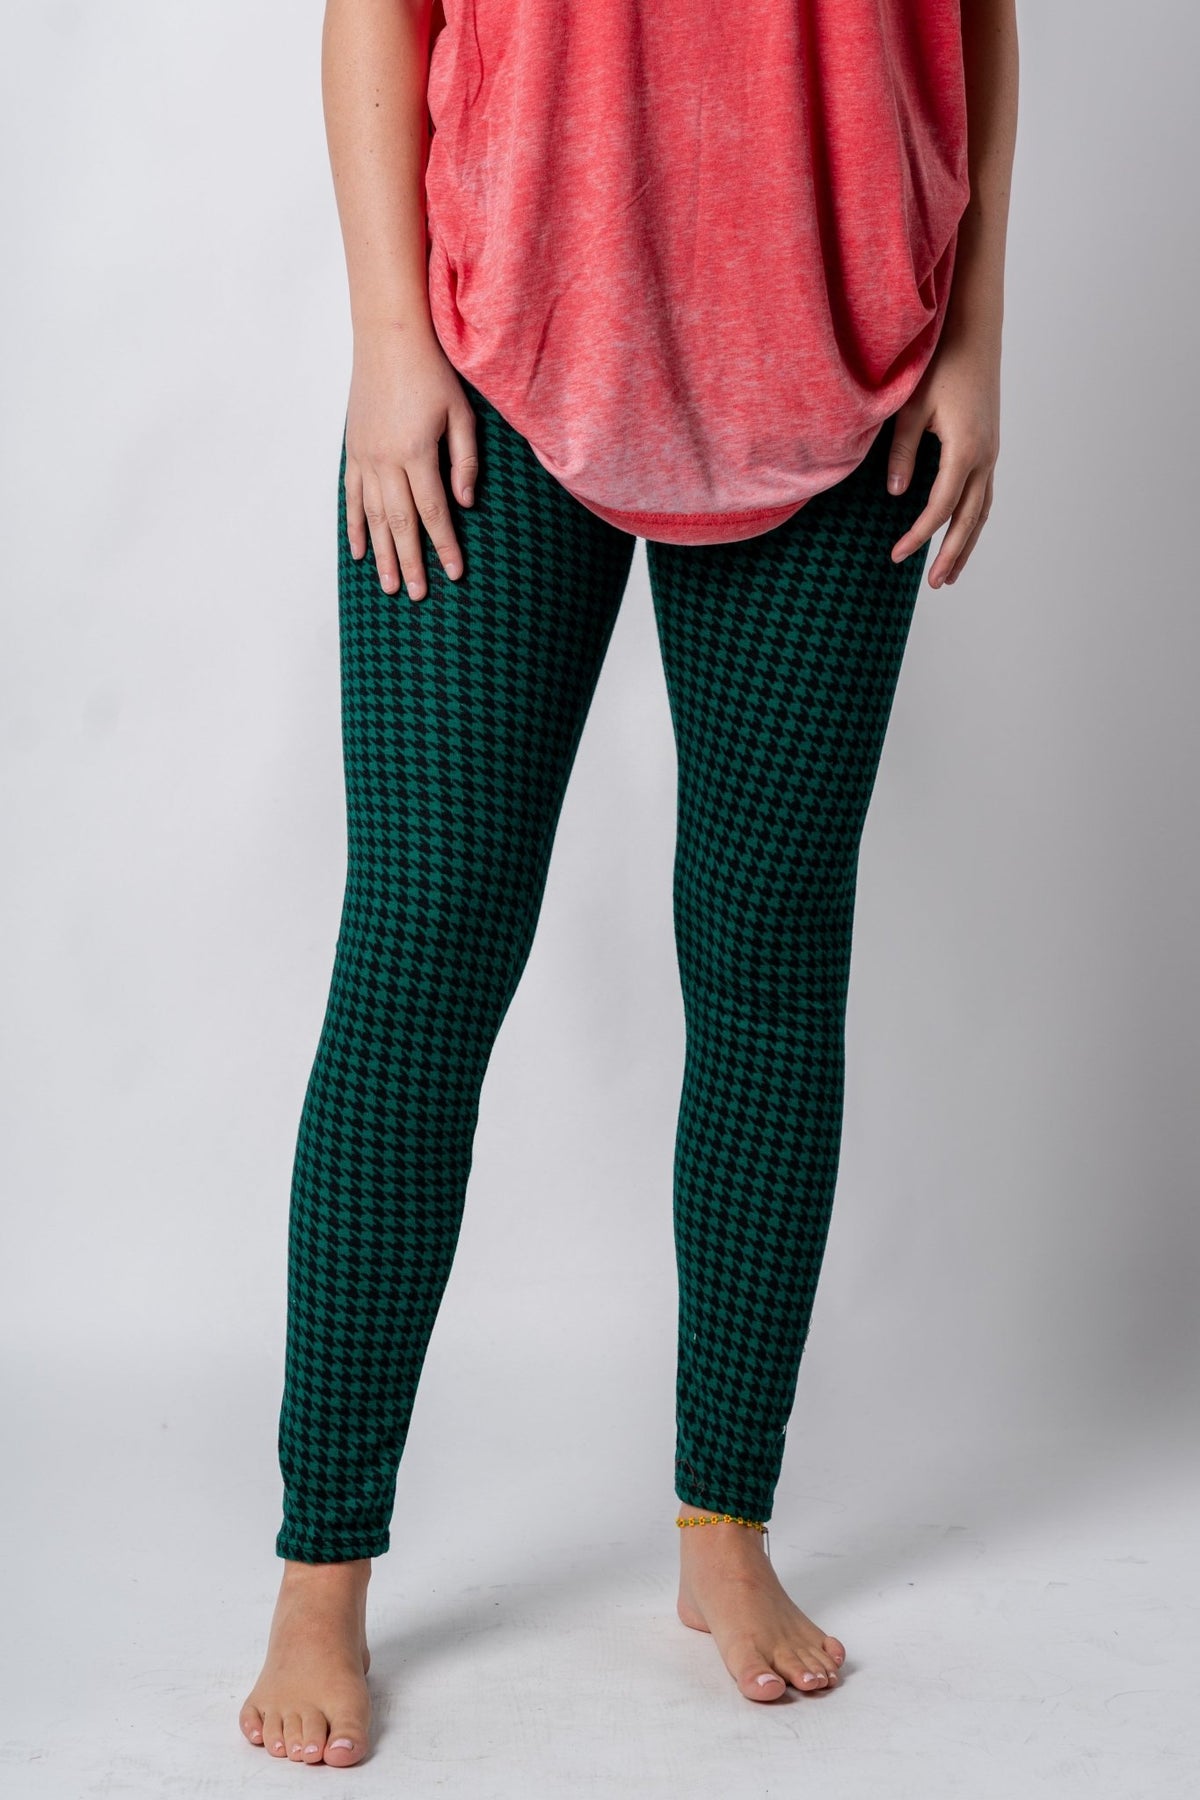 Hounds tooth leggings hunter - Trendy Holiday Apparel at Lush Fashion Lounge Boutique in Oklahoma City